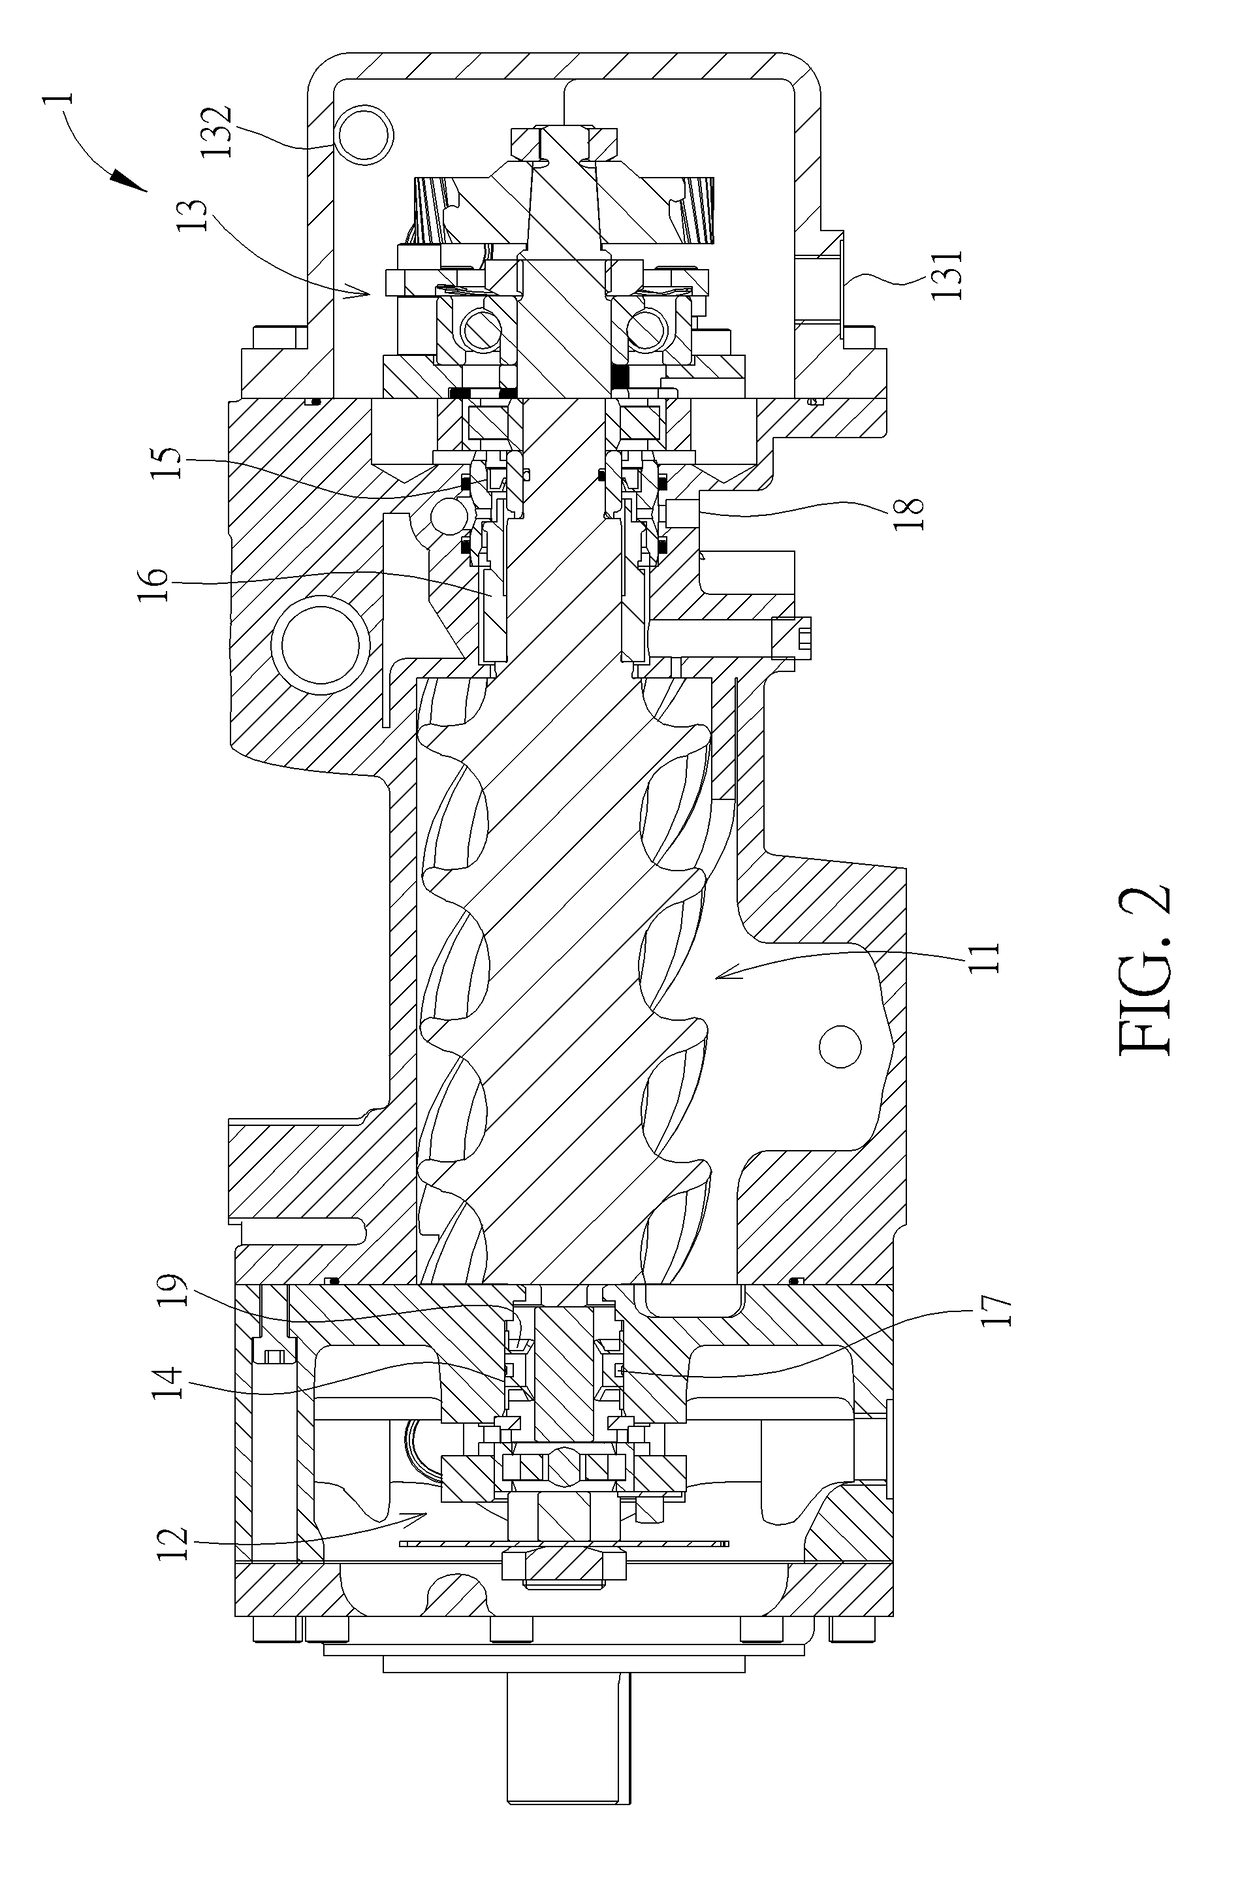 Water lubrication air compression system